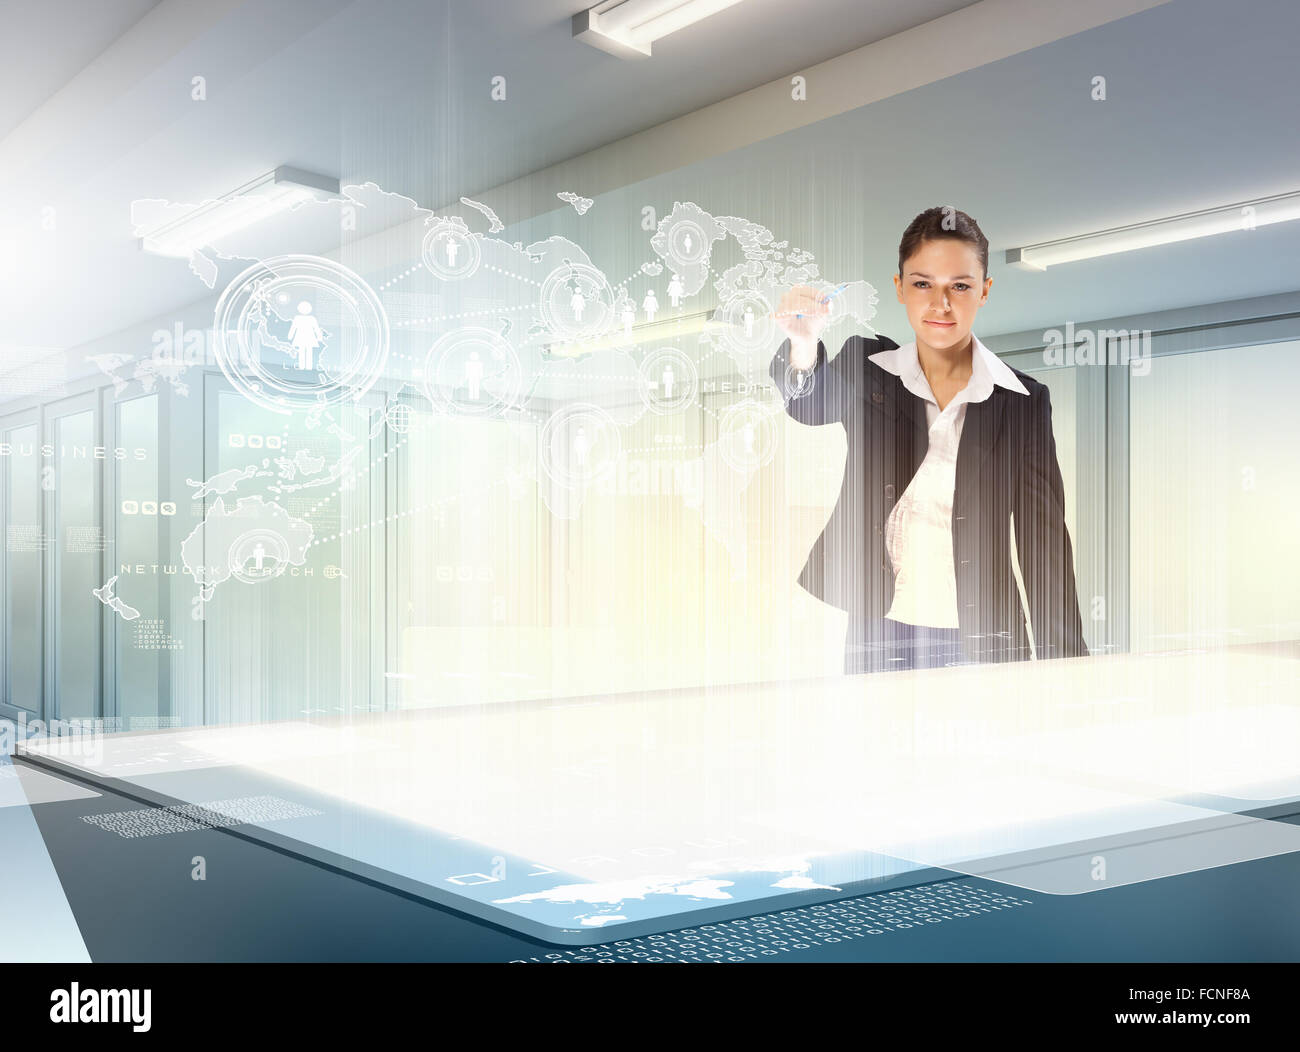 Image of young businesswoman clicking icon on high-tech picture Stock Photo